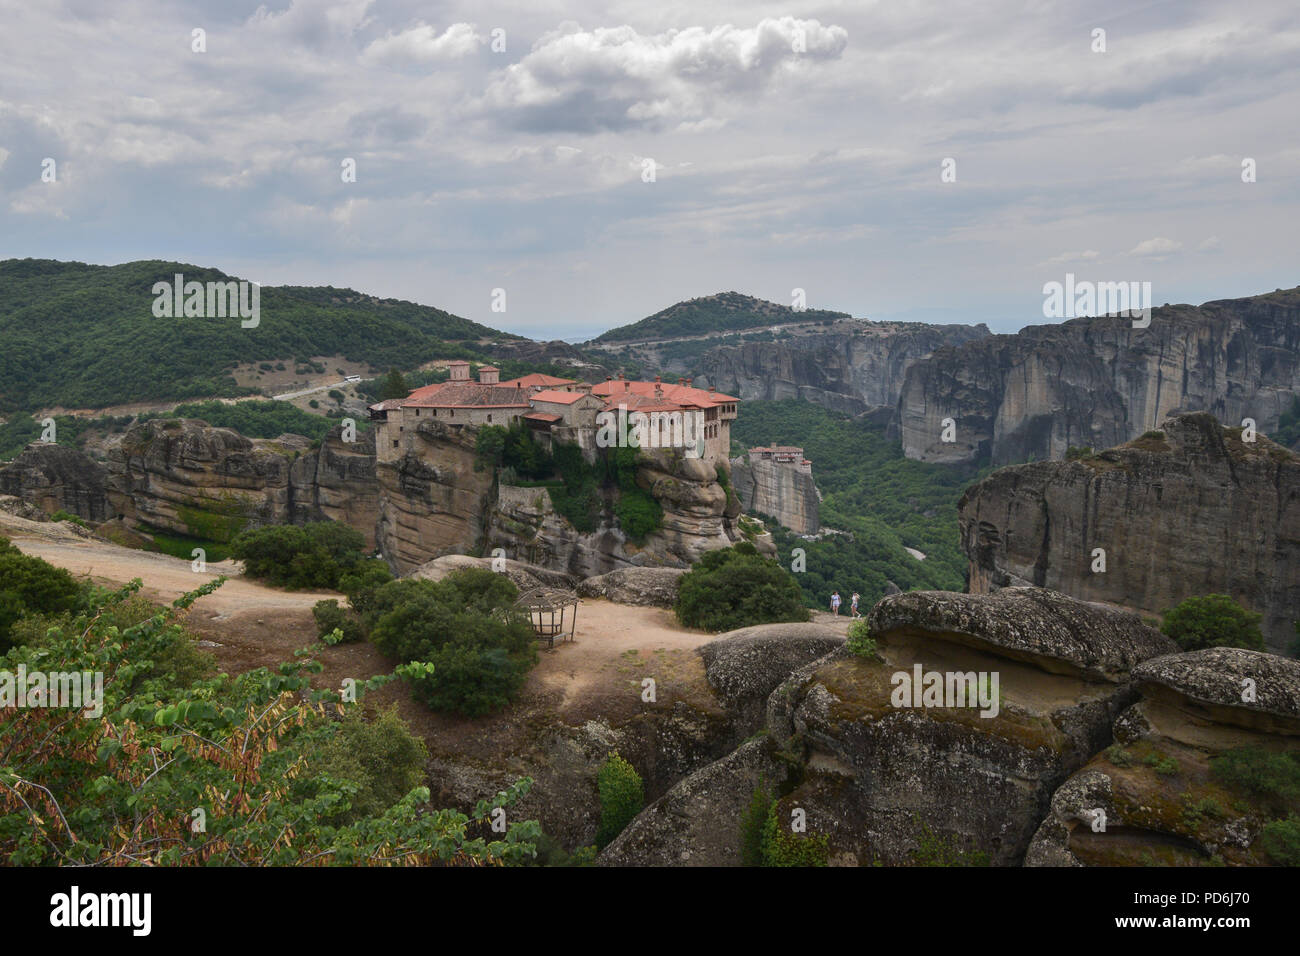 The Meteora is a rock formation in central Greece hosting one of the largest and most precipitously built complexes of Eastern Orthodox monasteries. Stock Photo